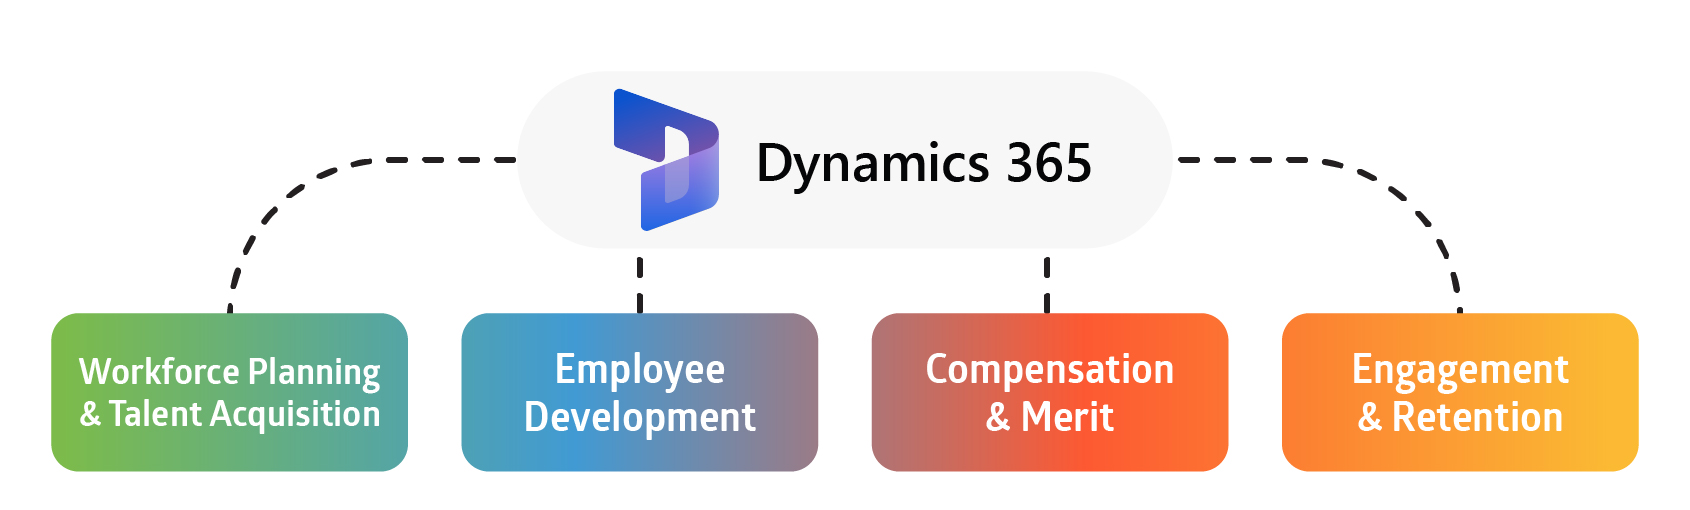 Main Functions of Talent Management in Dynamics 365